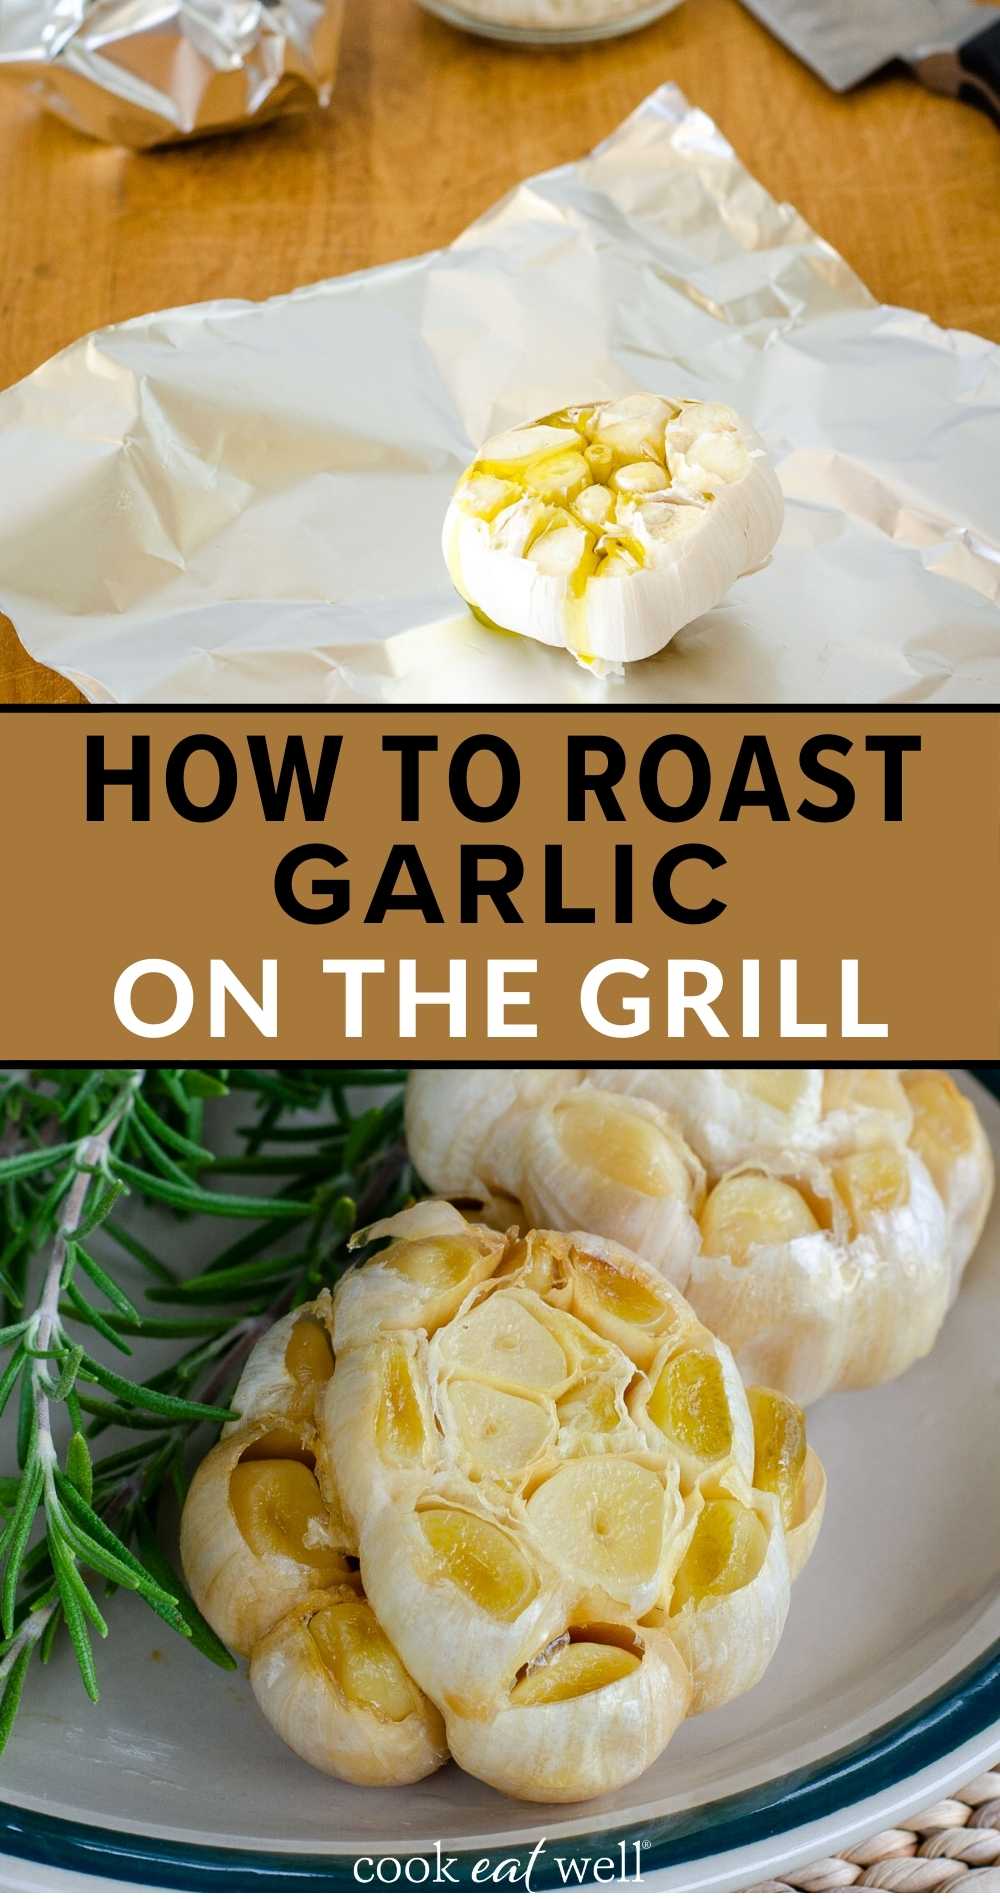 Roasted Garlic on the Grill - Cook Eat Well